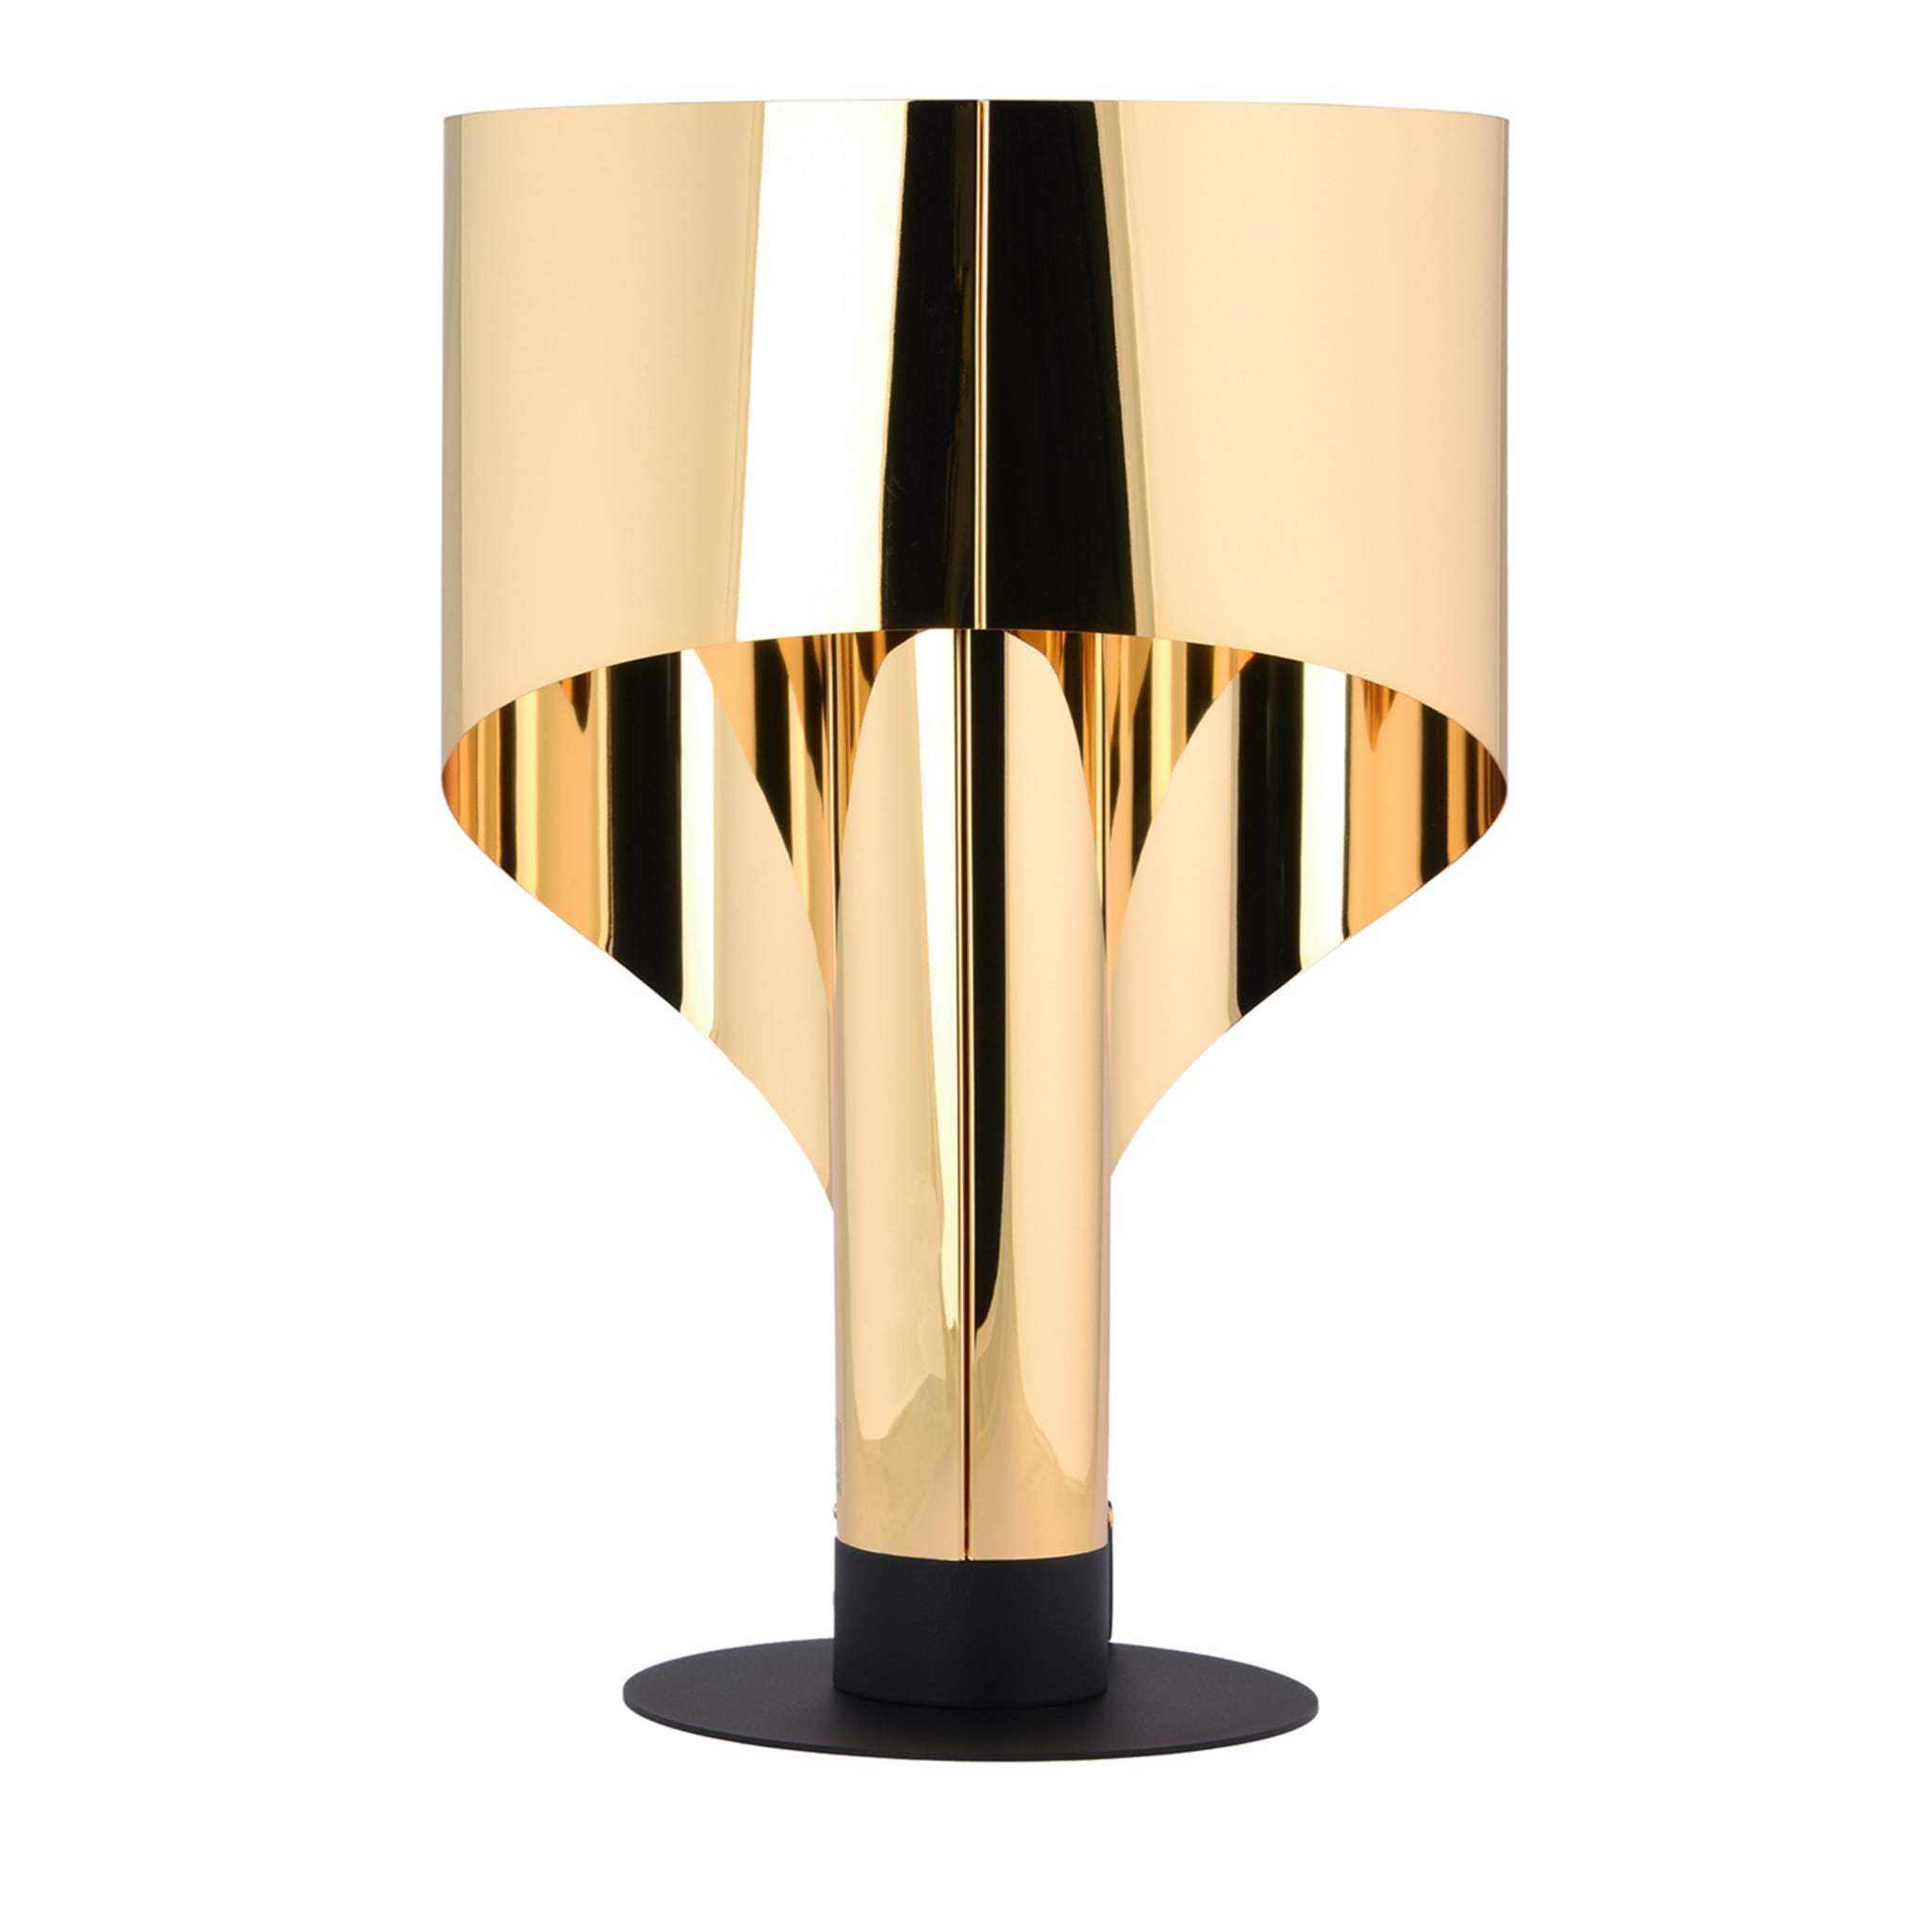 SPINNAKER Gold table lamp by Corsini Wiskemann - Main view